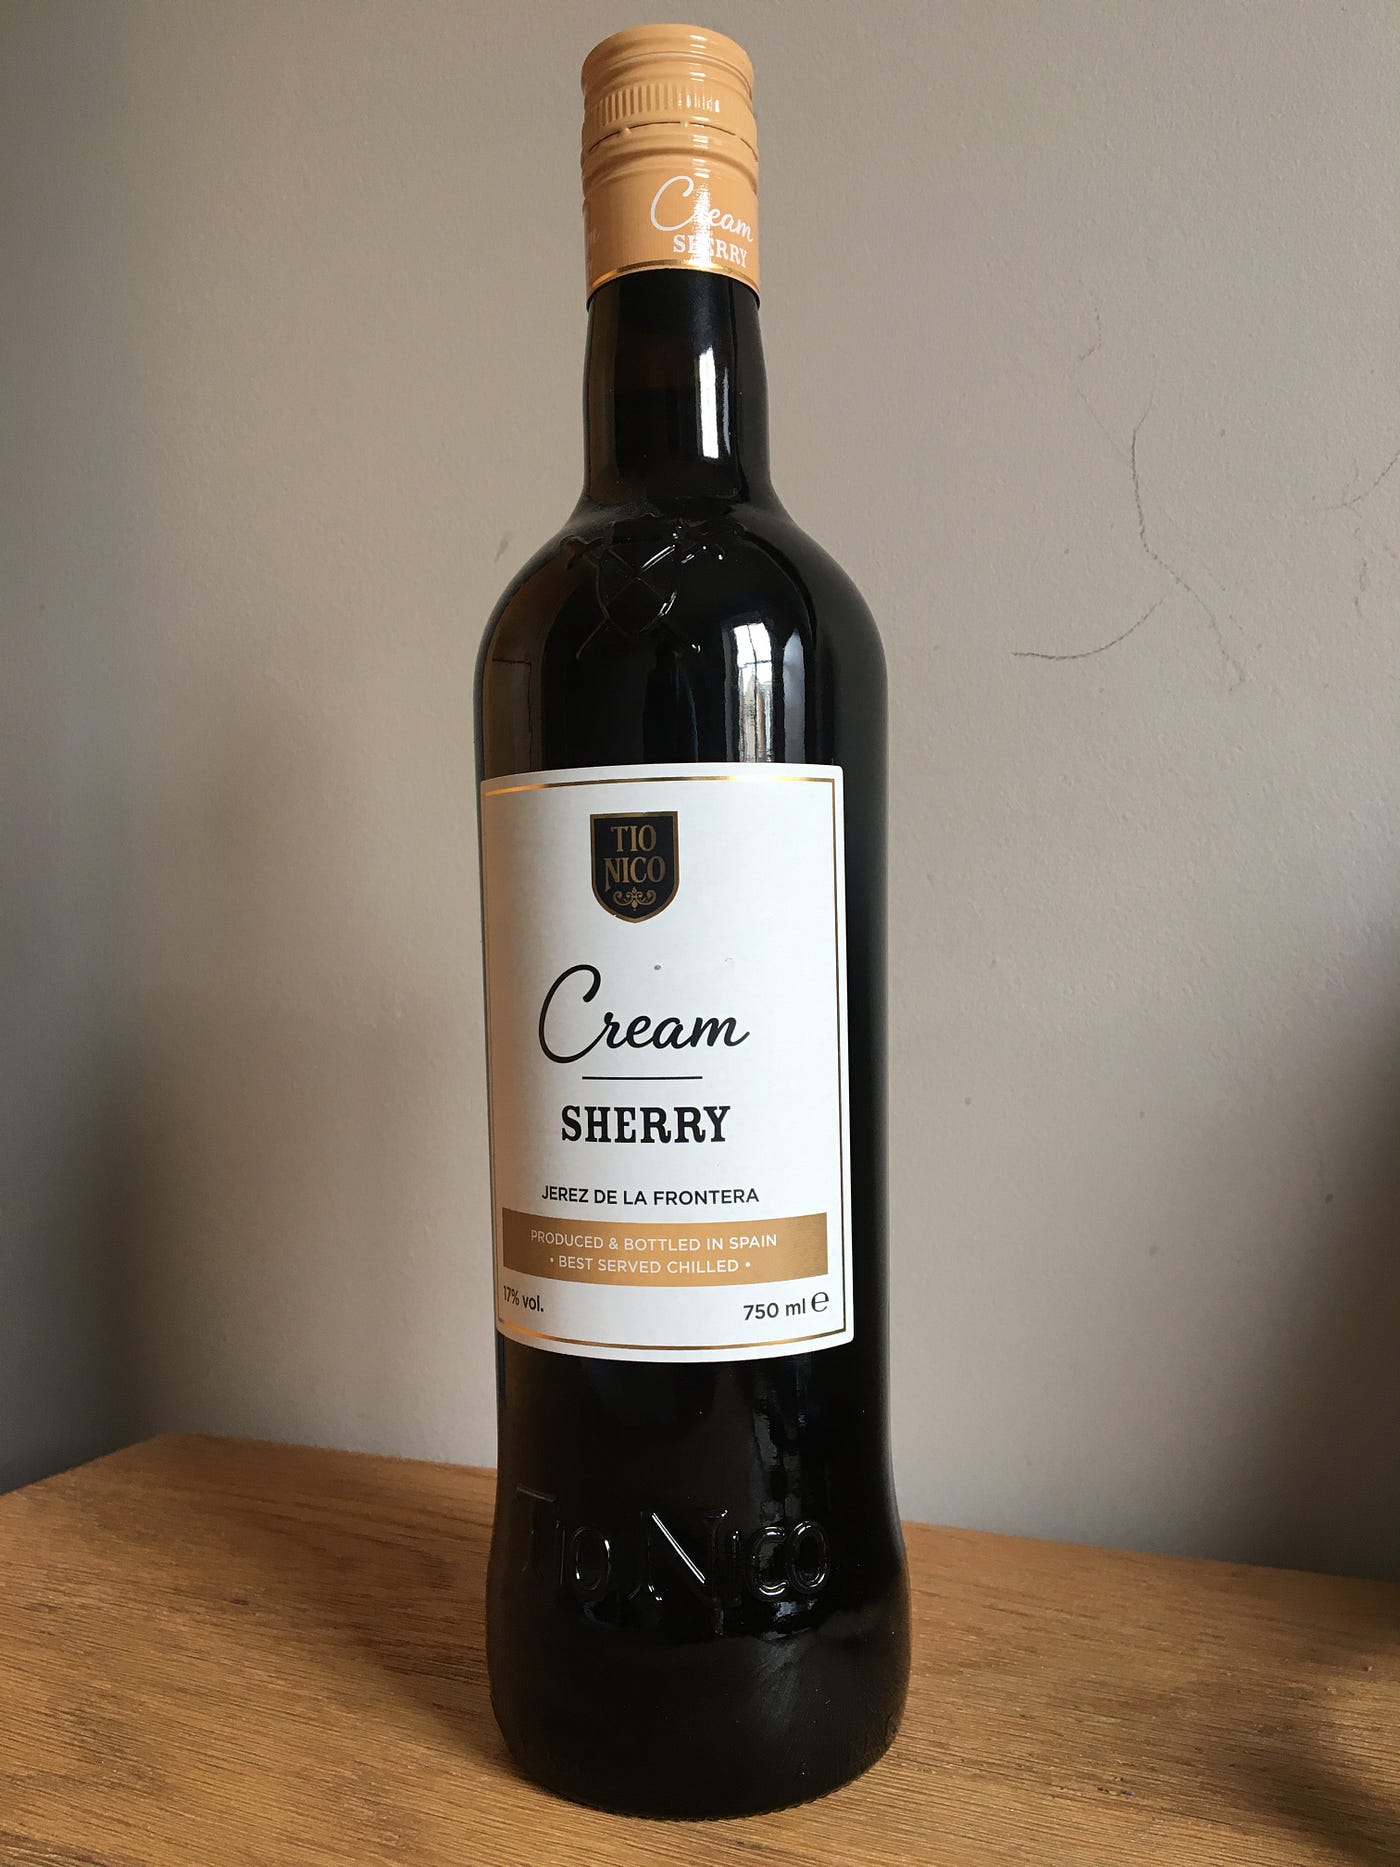 Lidl's Tio Nico Cream Sherry. An entry-level cream sherry from Lidl | by  Tom Lewis | Medium